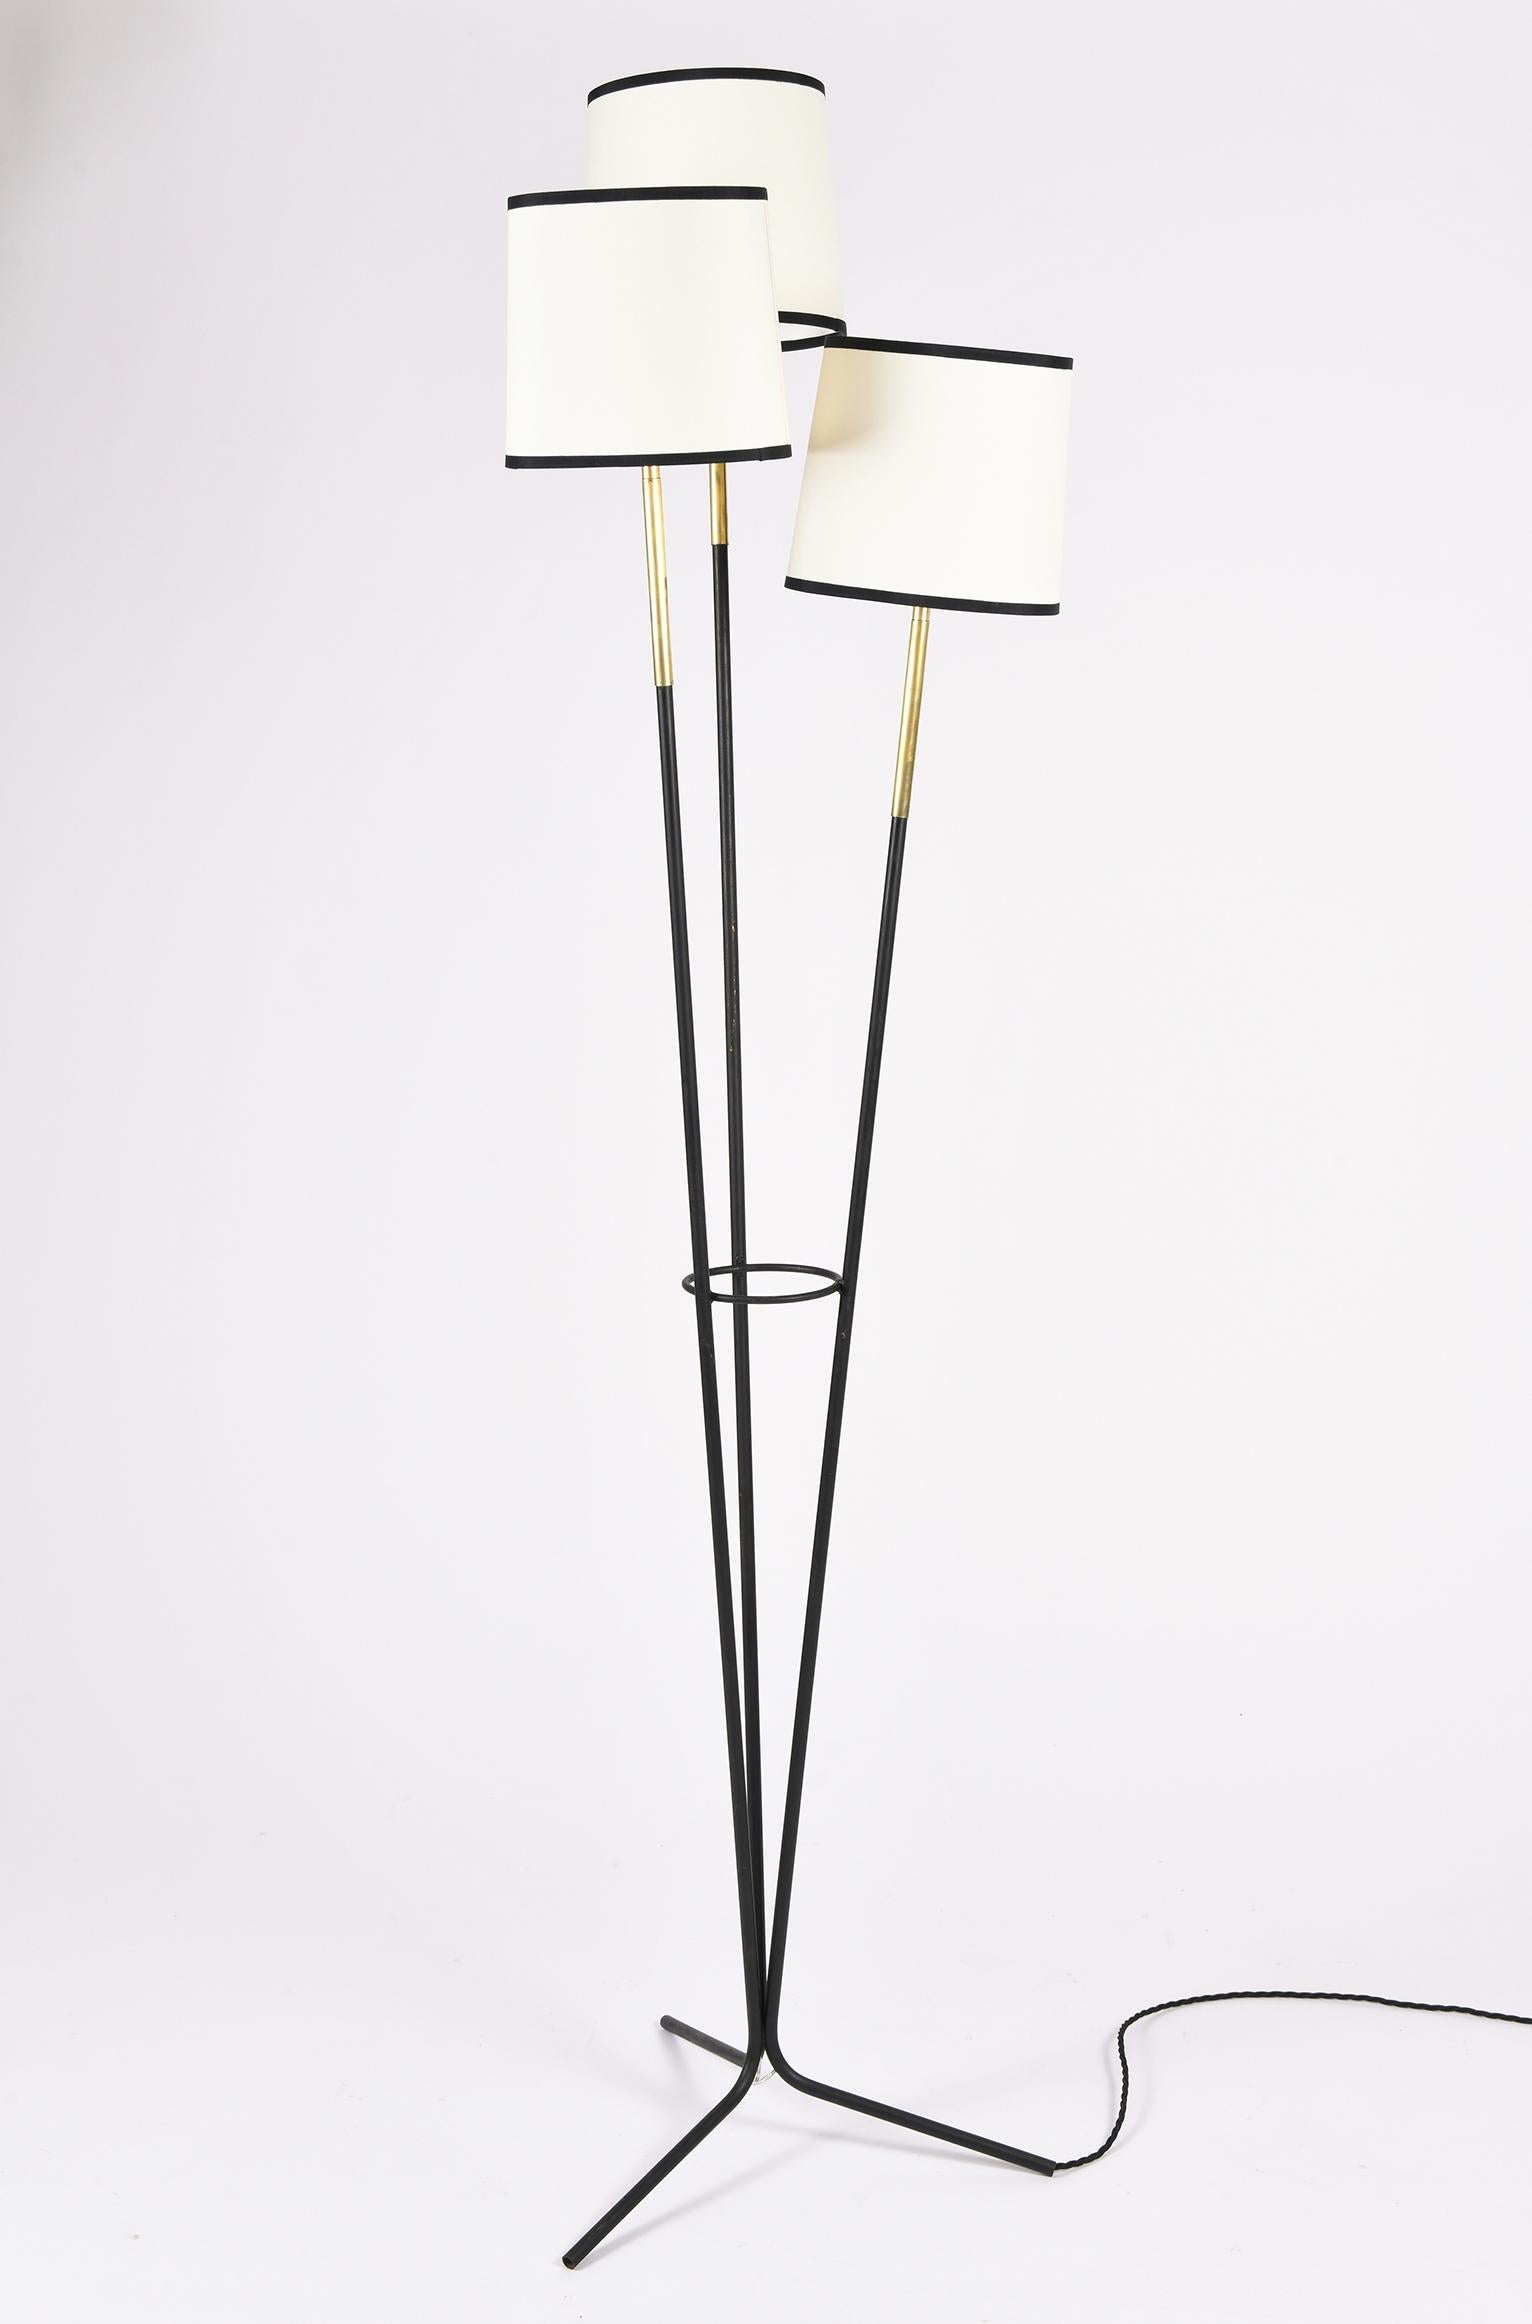 A triple stem black enamelled iron and brass tripod floor lamp
With bespoke lamp shades
France, circa 1950.